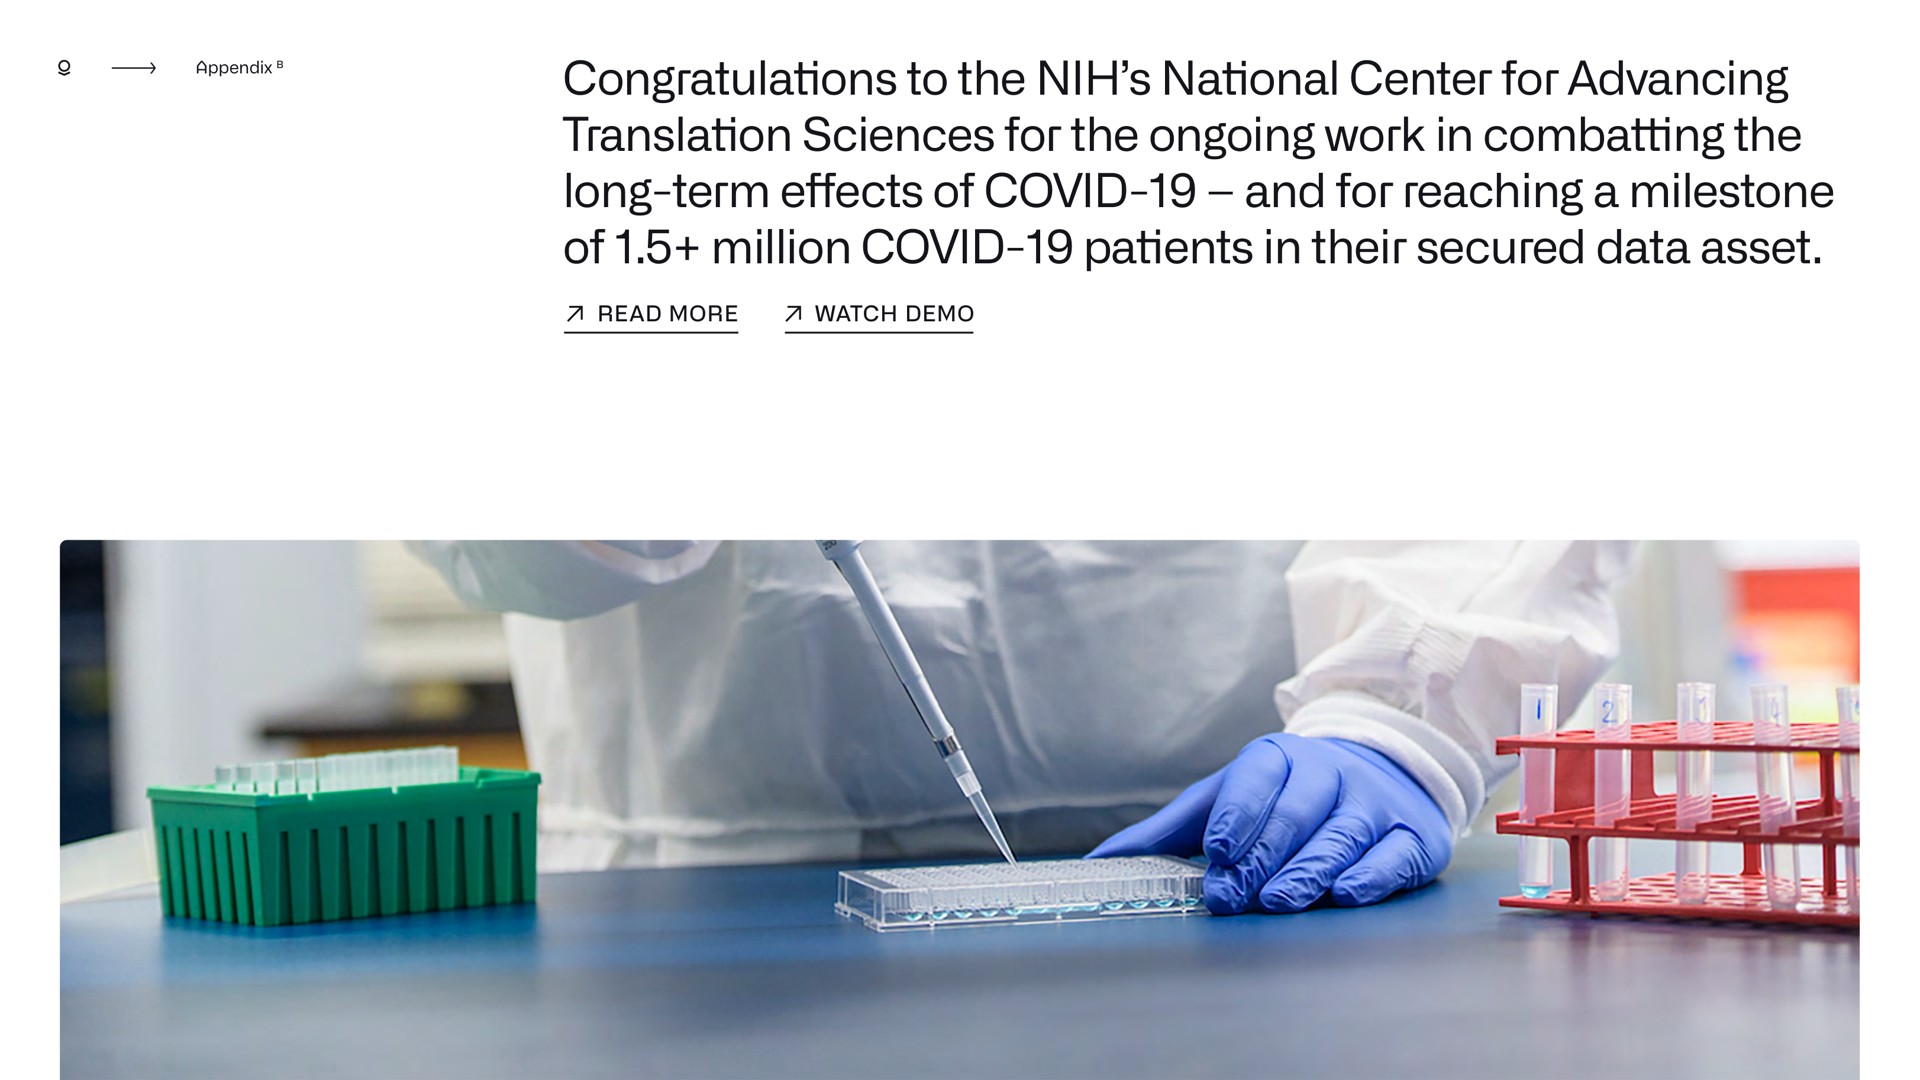 congratulations to the national center for advancing translation sciences for the ongoing work in combatting the long term effects of covid and for reaching a milestone of million covid patients in their secured data asset | Palantir